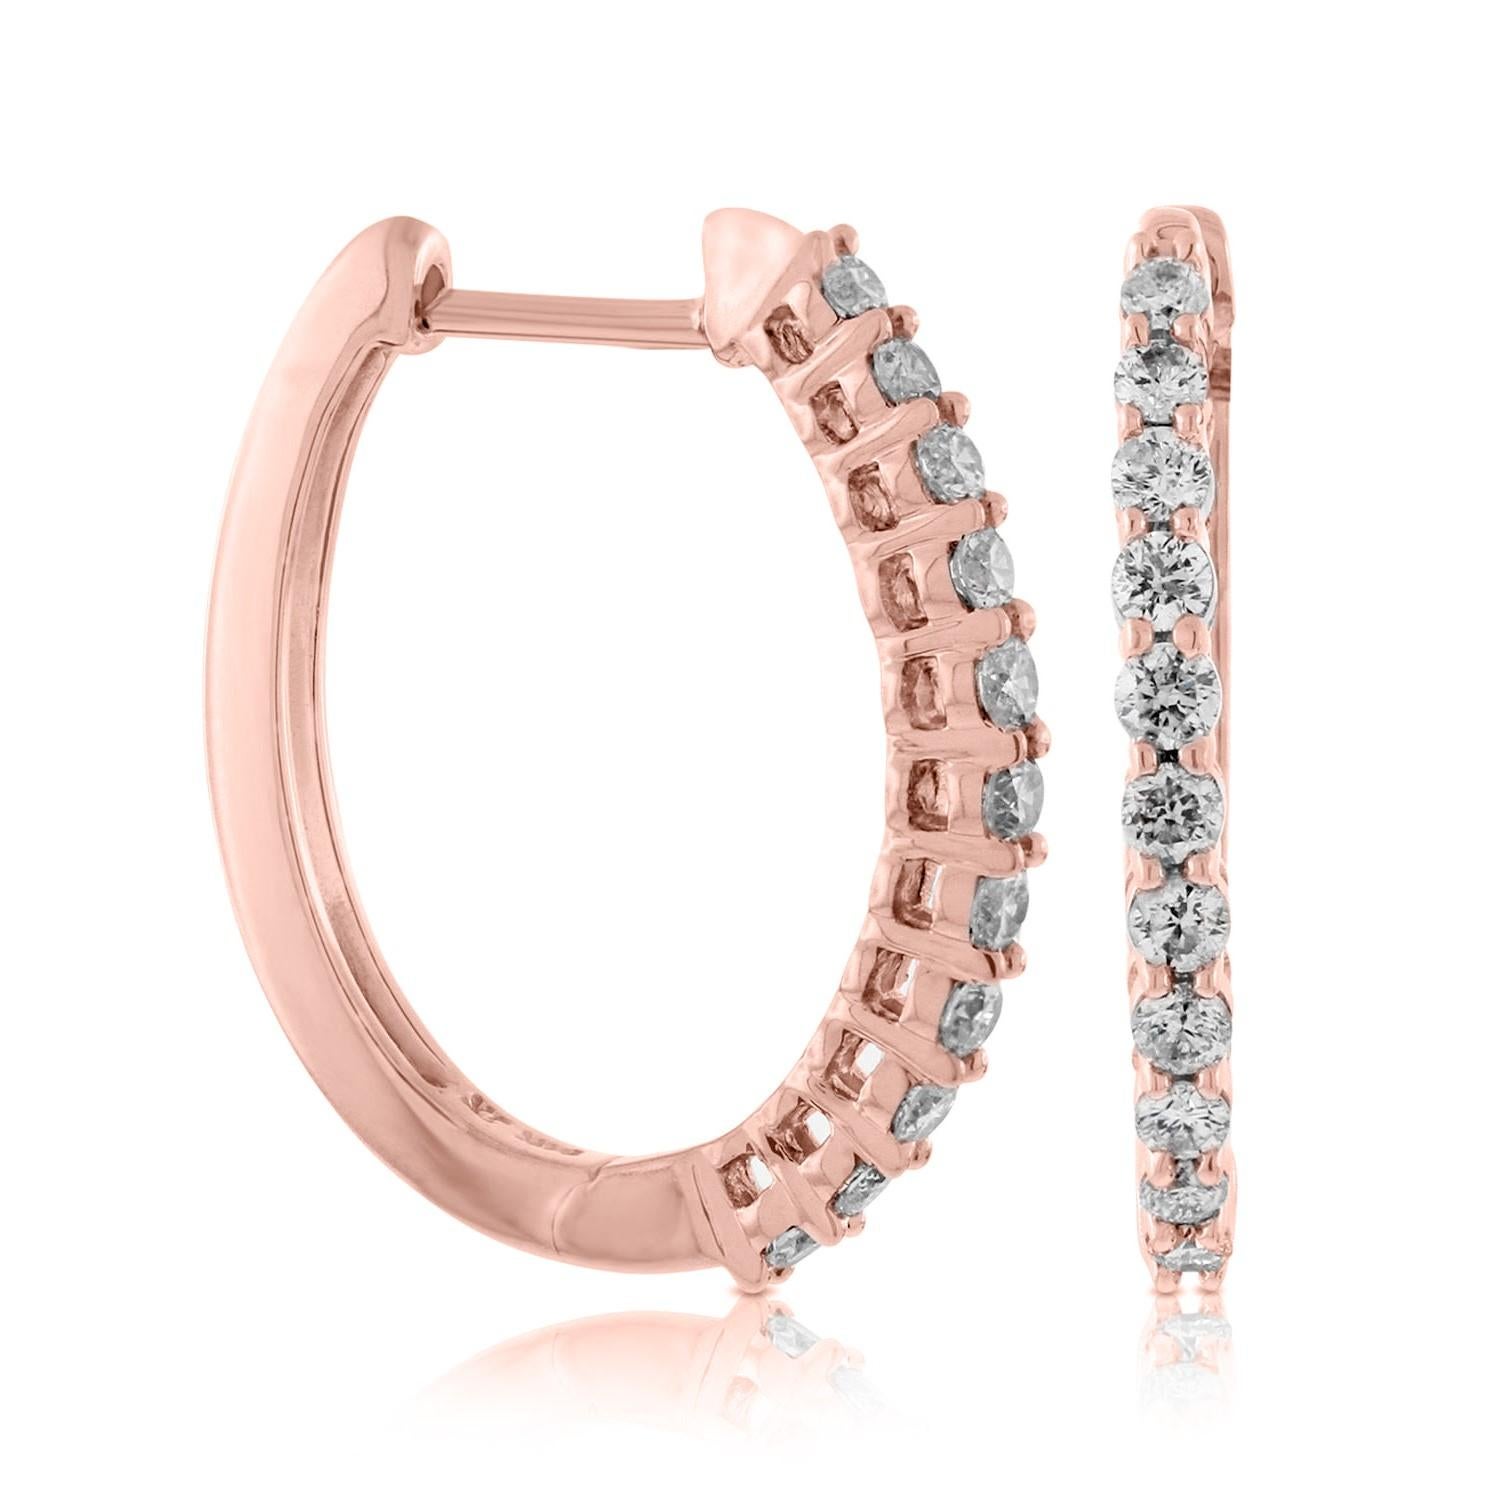 Nothing says luxury like an incredible pair of diamond round hoop earrings. These stunning brightly polished 14 karat white gold round-shaped hoop earrings feature a total of 24 round brilliant cut diamonds totaling .25 carats are prong set on the